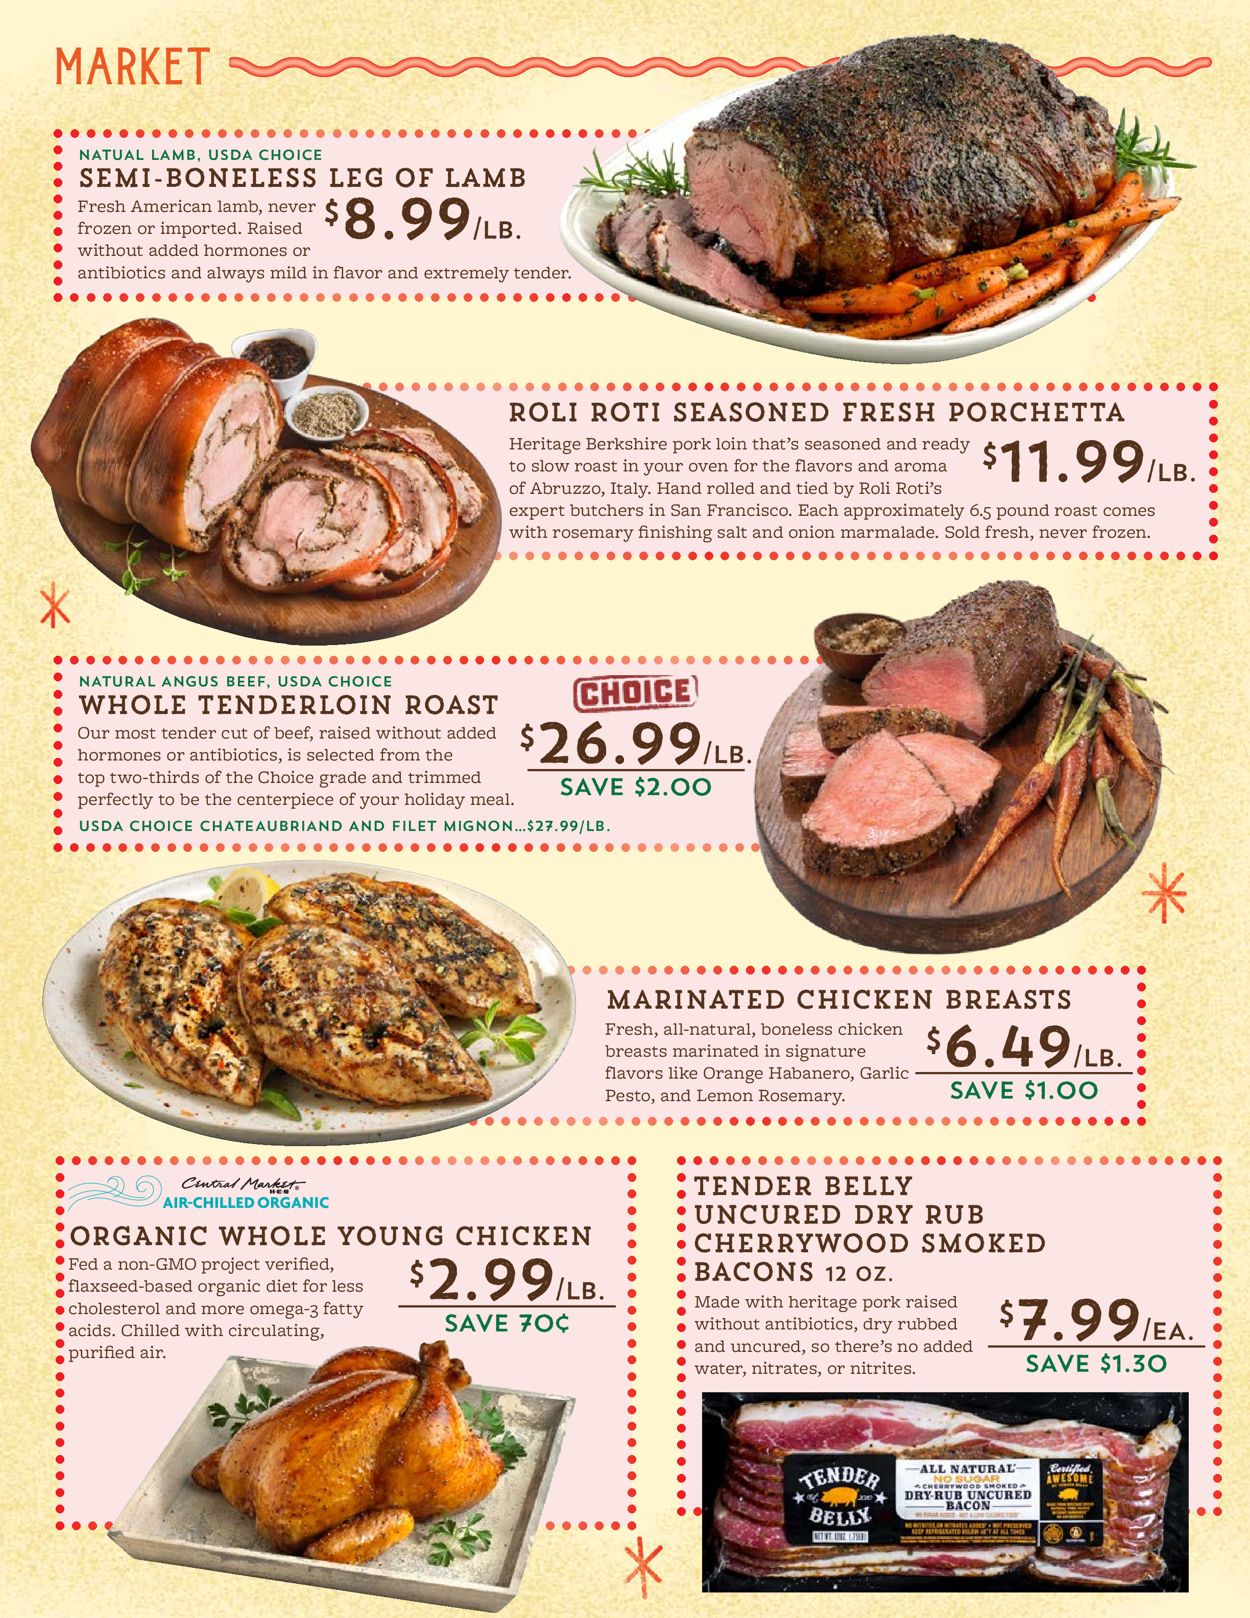 Catalogue Central Market Weekly Savor  from 12/16/2020